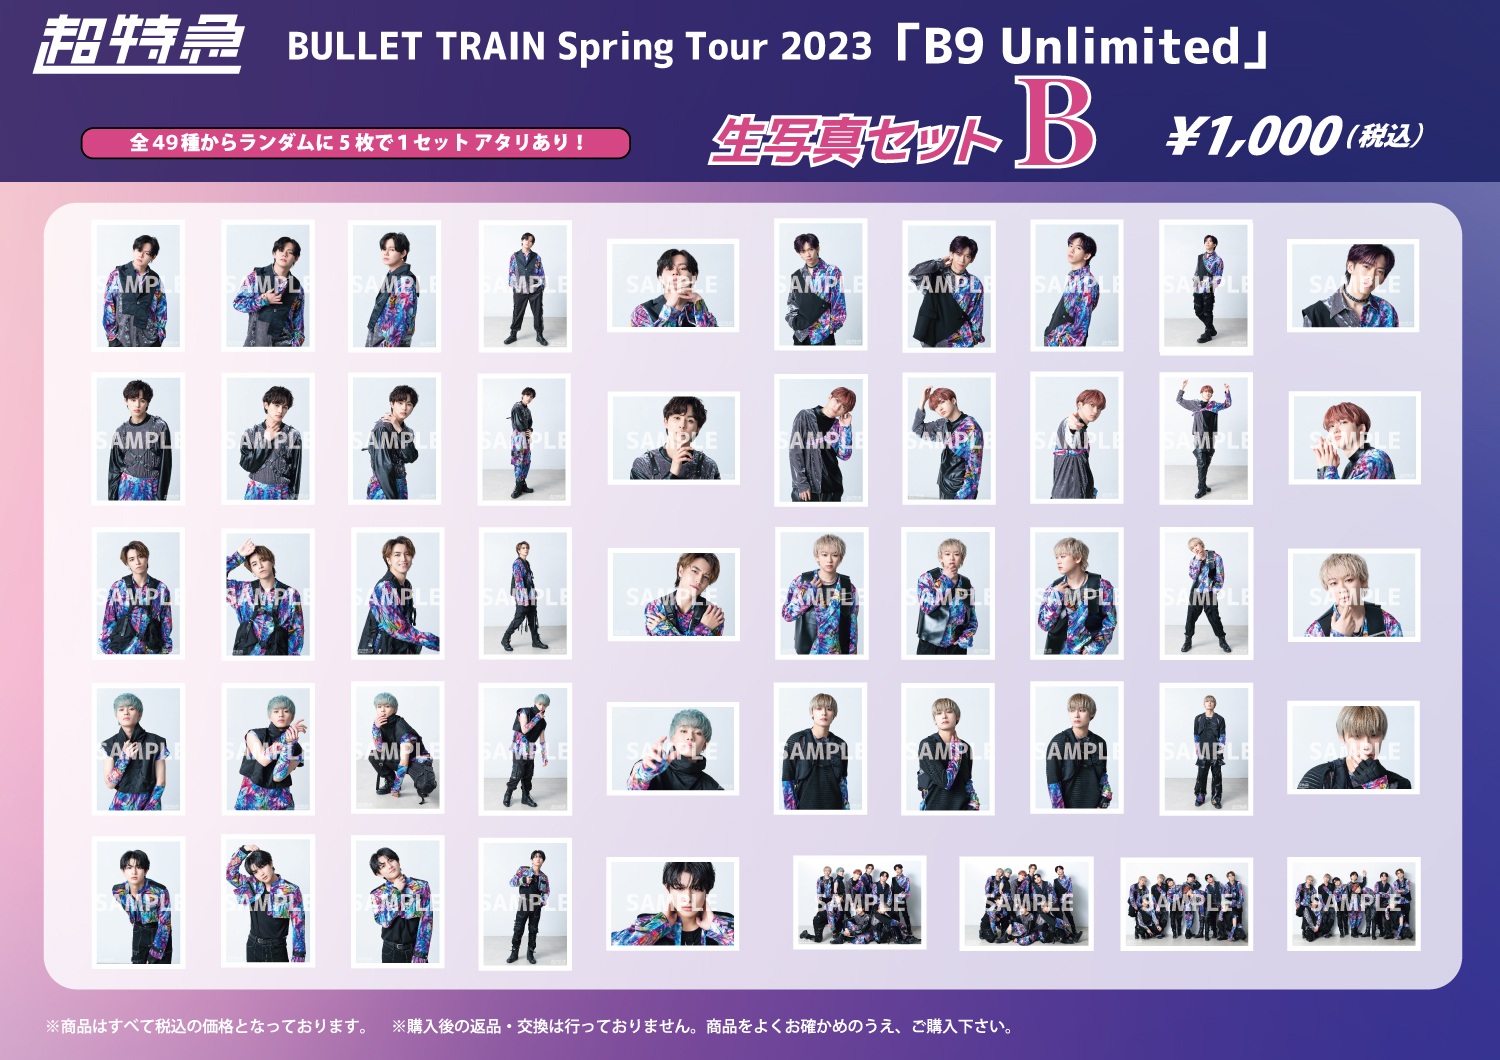 BULLET TRAIN Spring Tour 2023「B9 Unlimited」8号車の日 会場販売の 